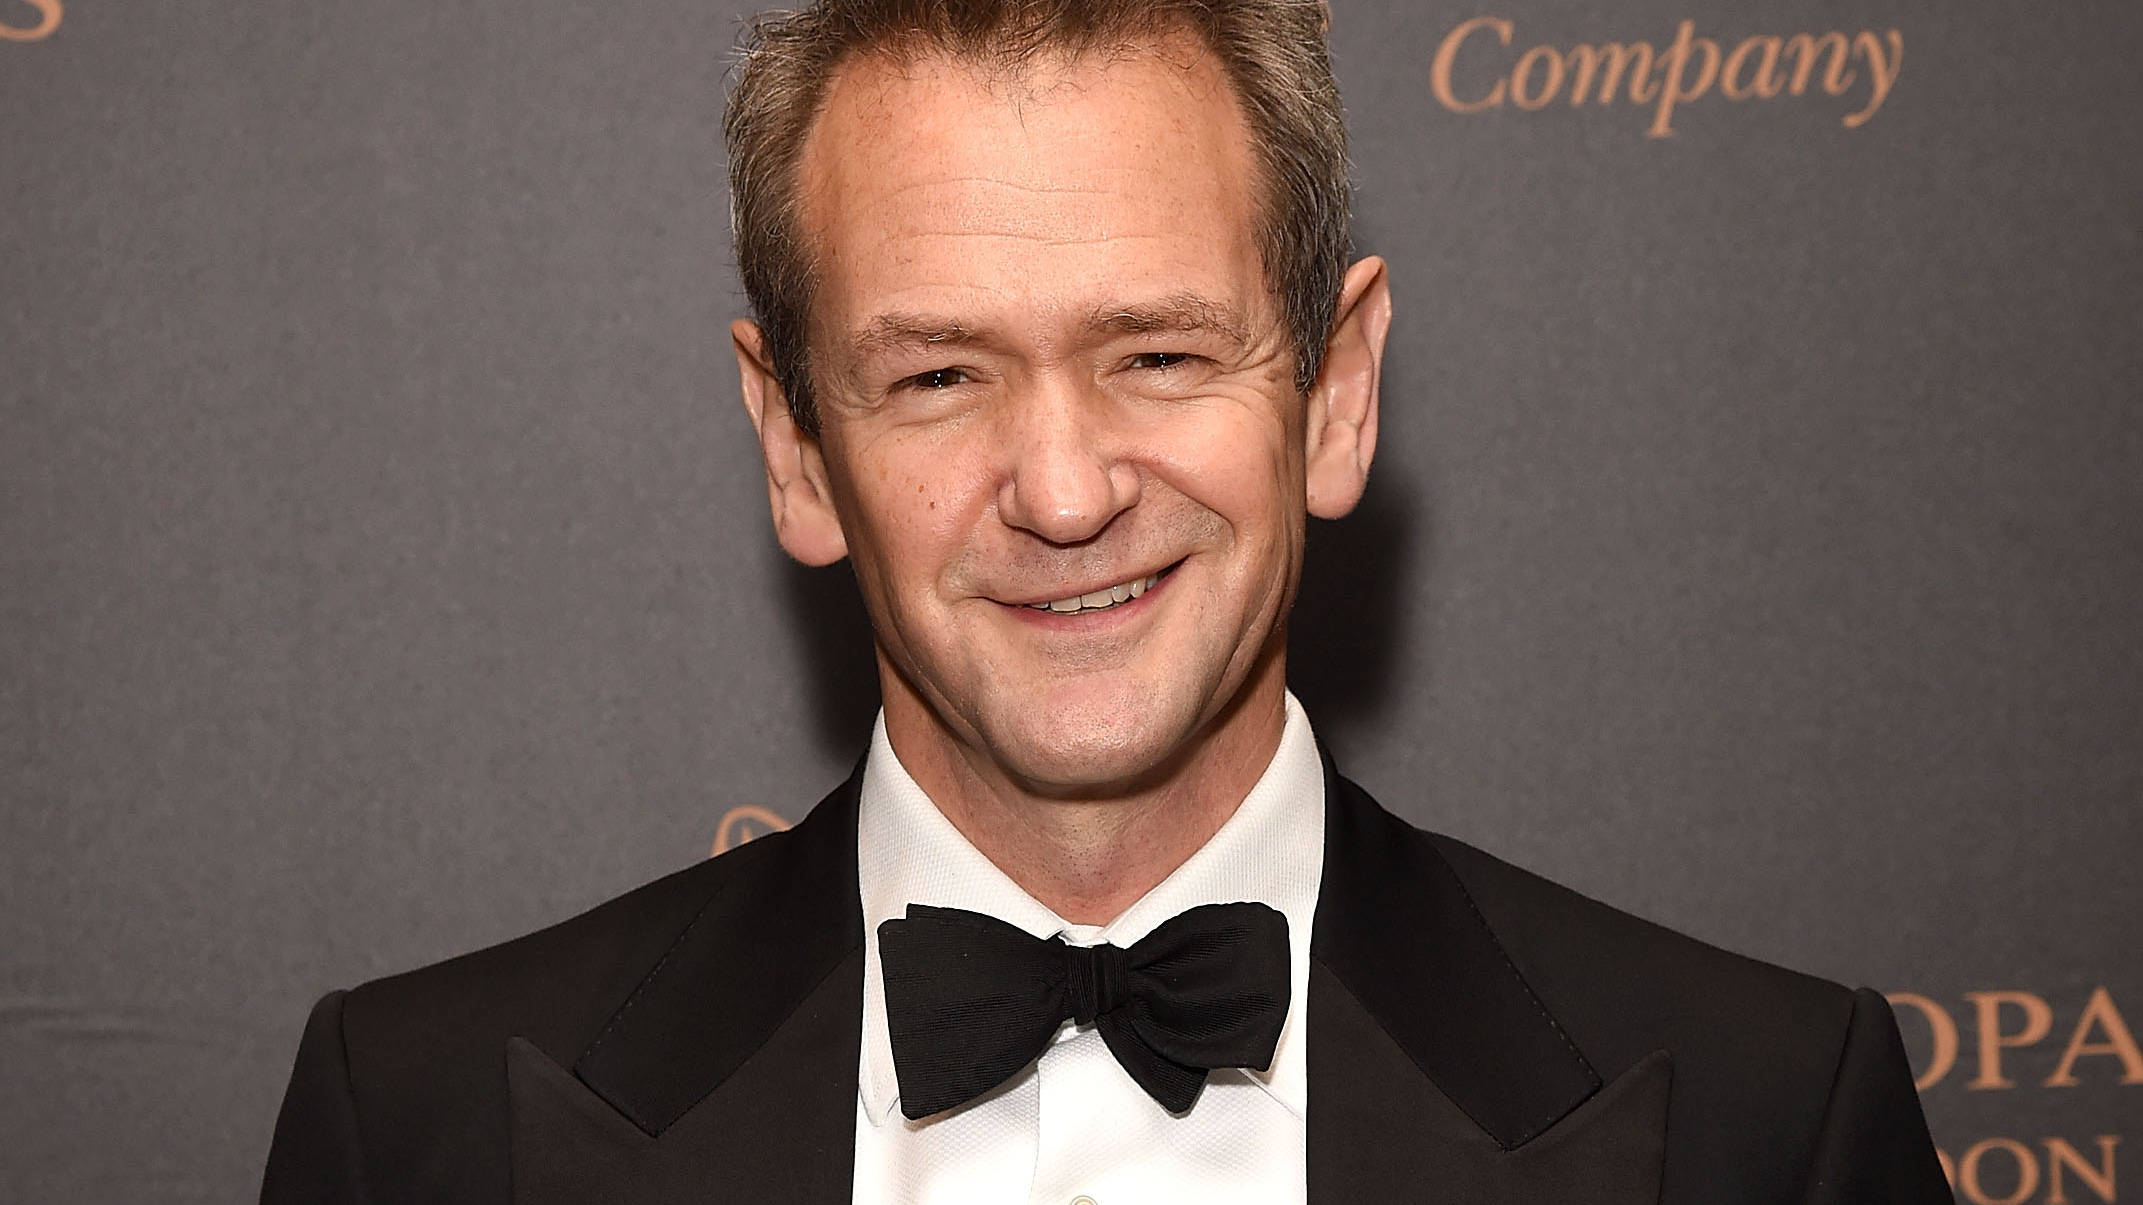 How tall is Alexander Armstrong?